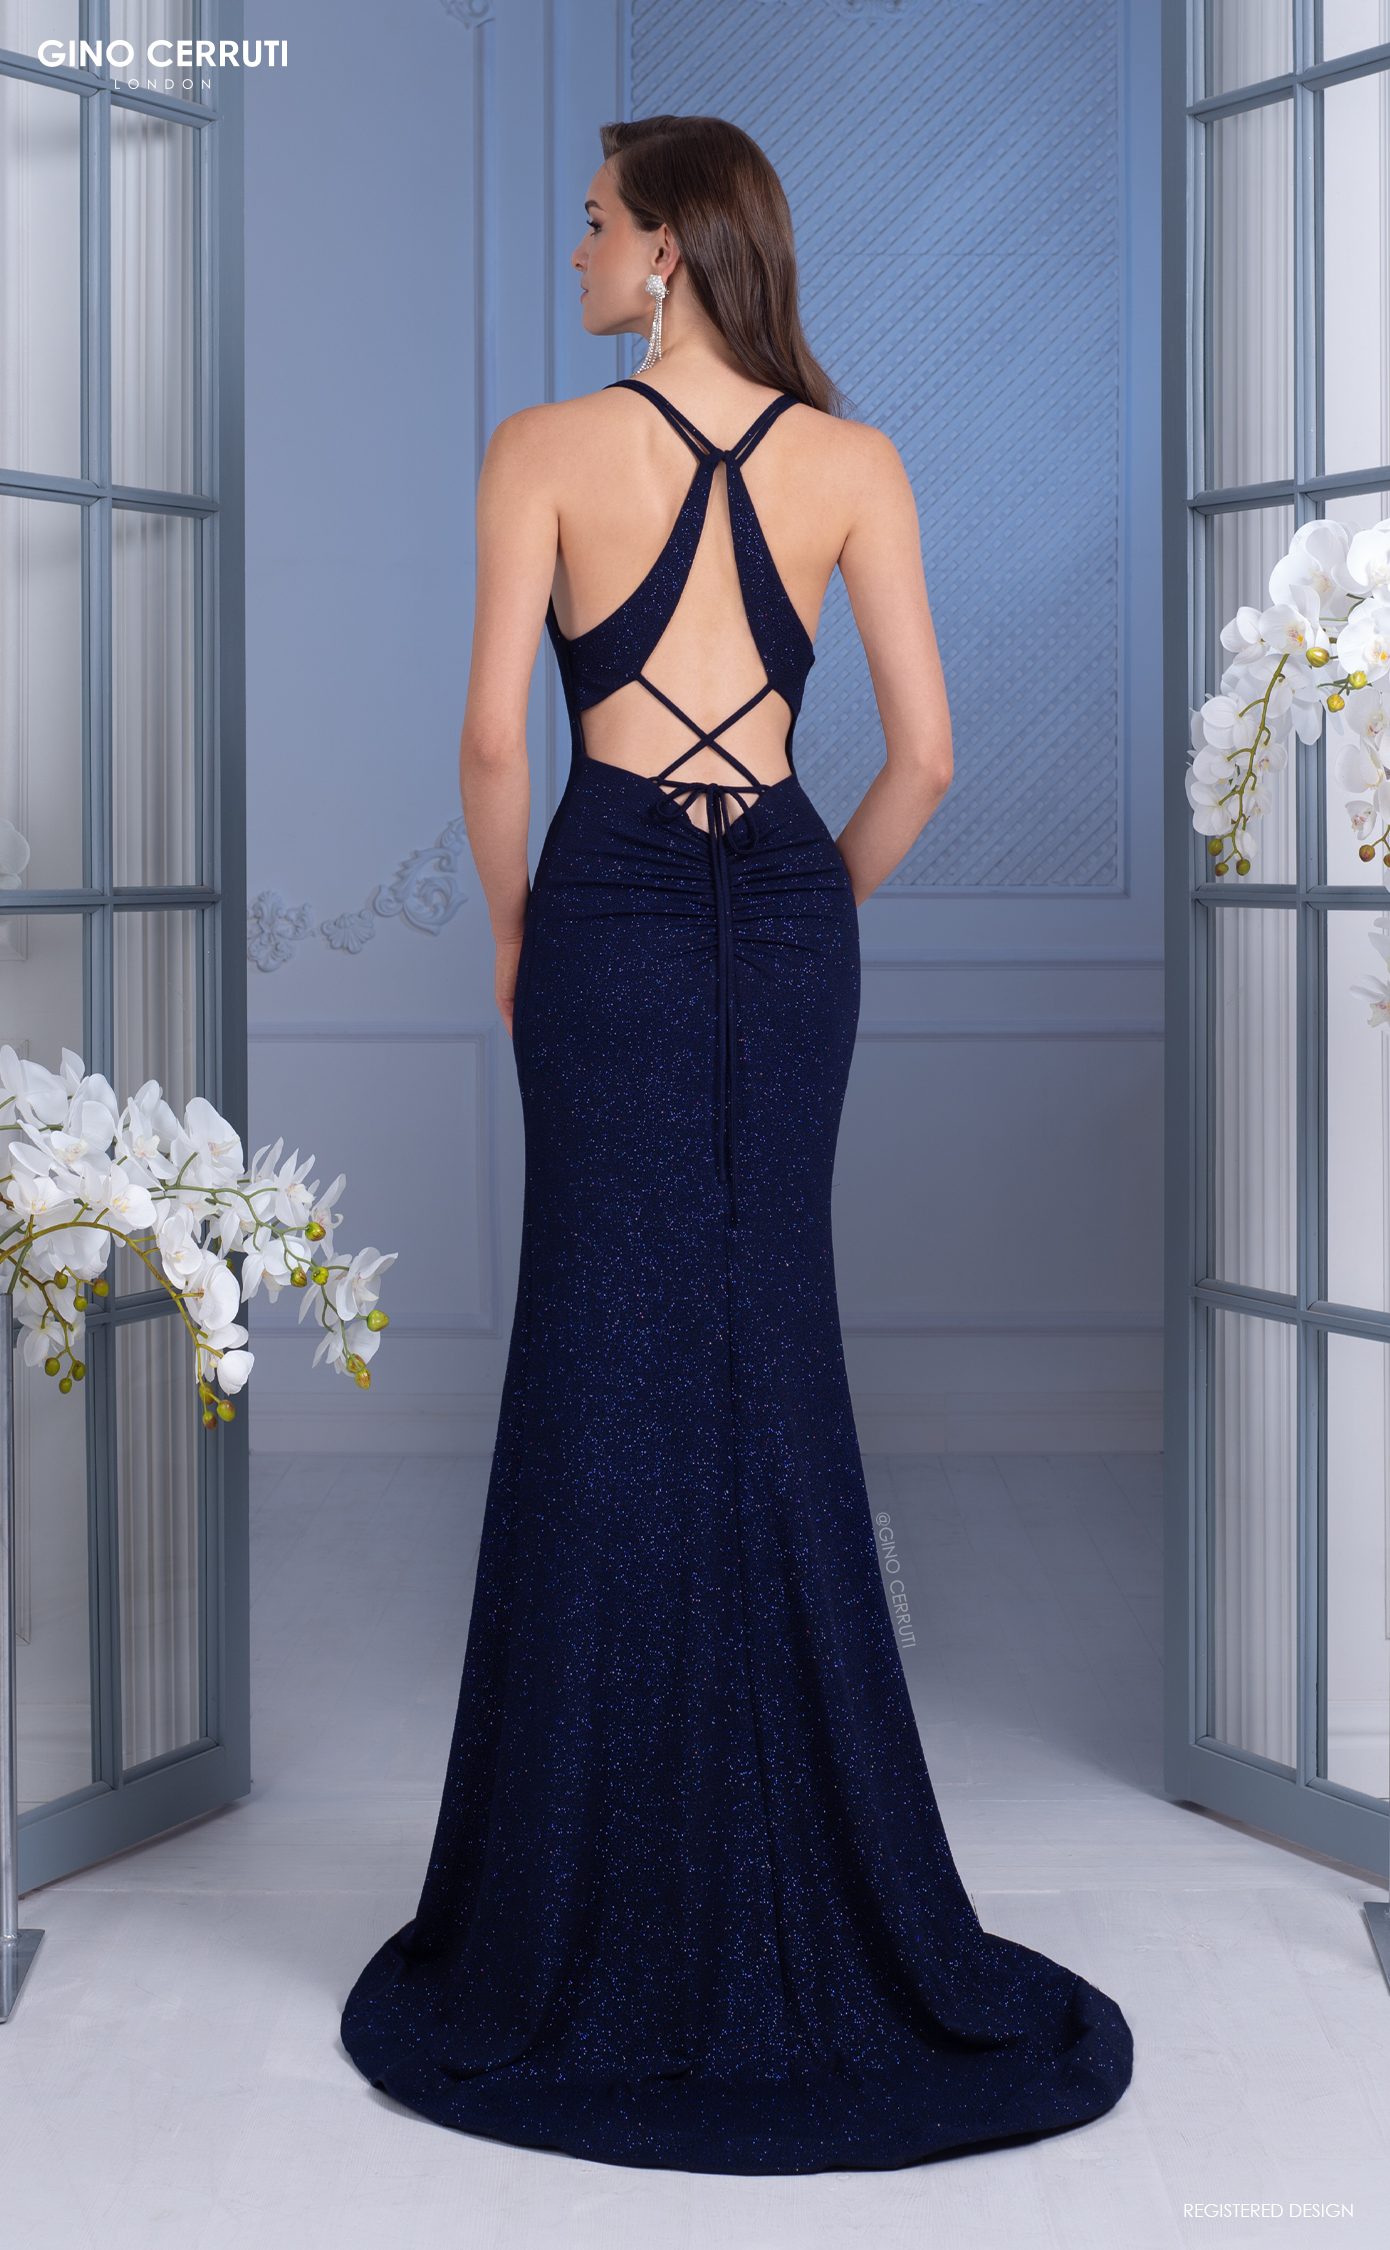 The beautiful Evangeline prom dress in midnight, available now at MK Prom in Bletchley, Milton Keynes!